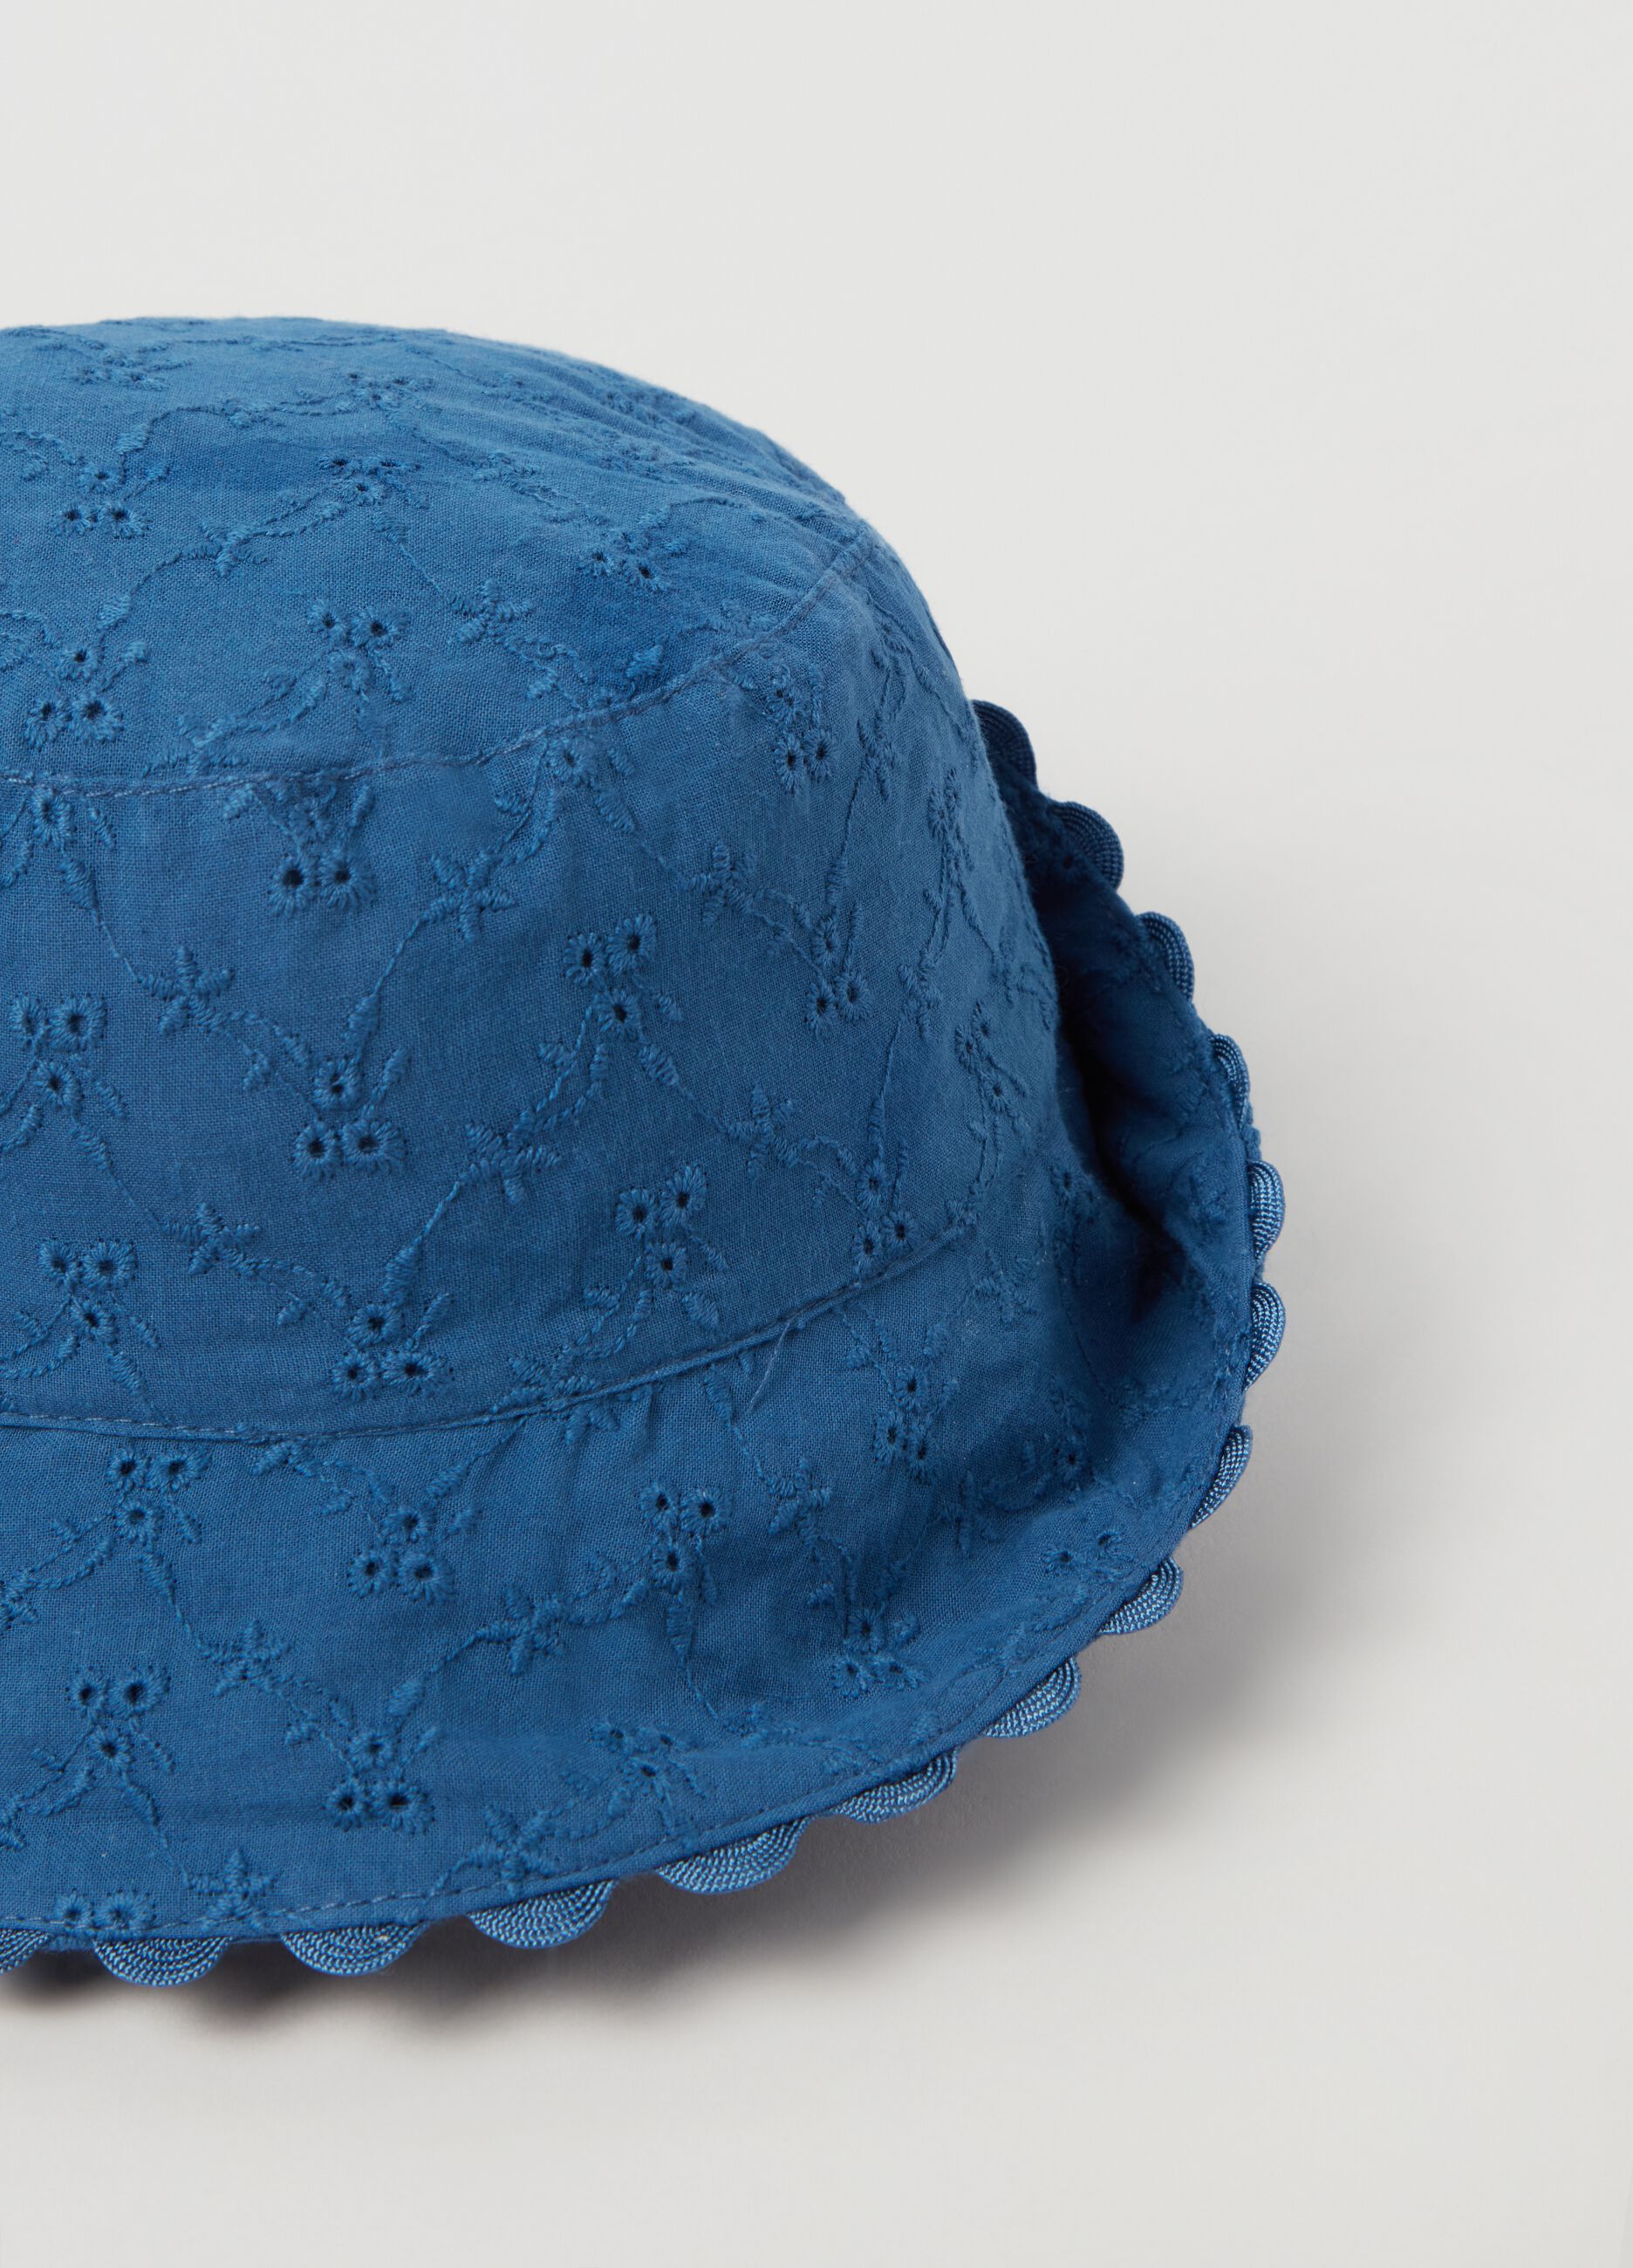 Fishing hat in broderie anglaise